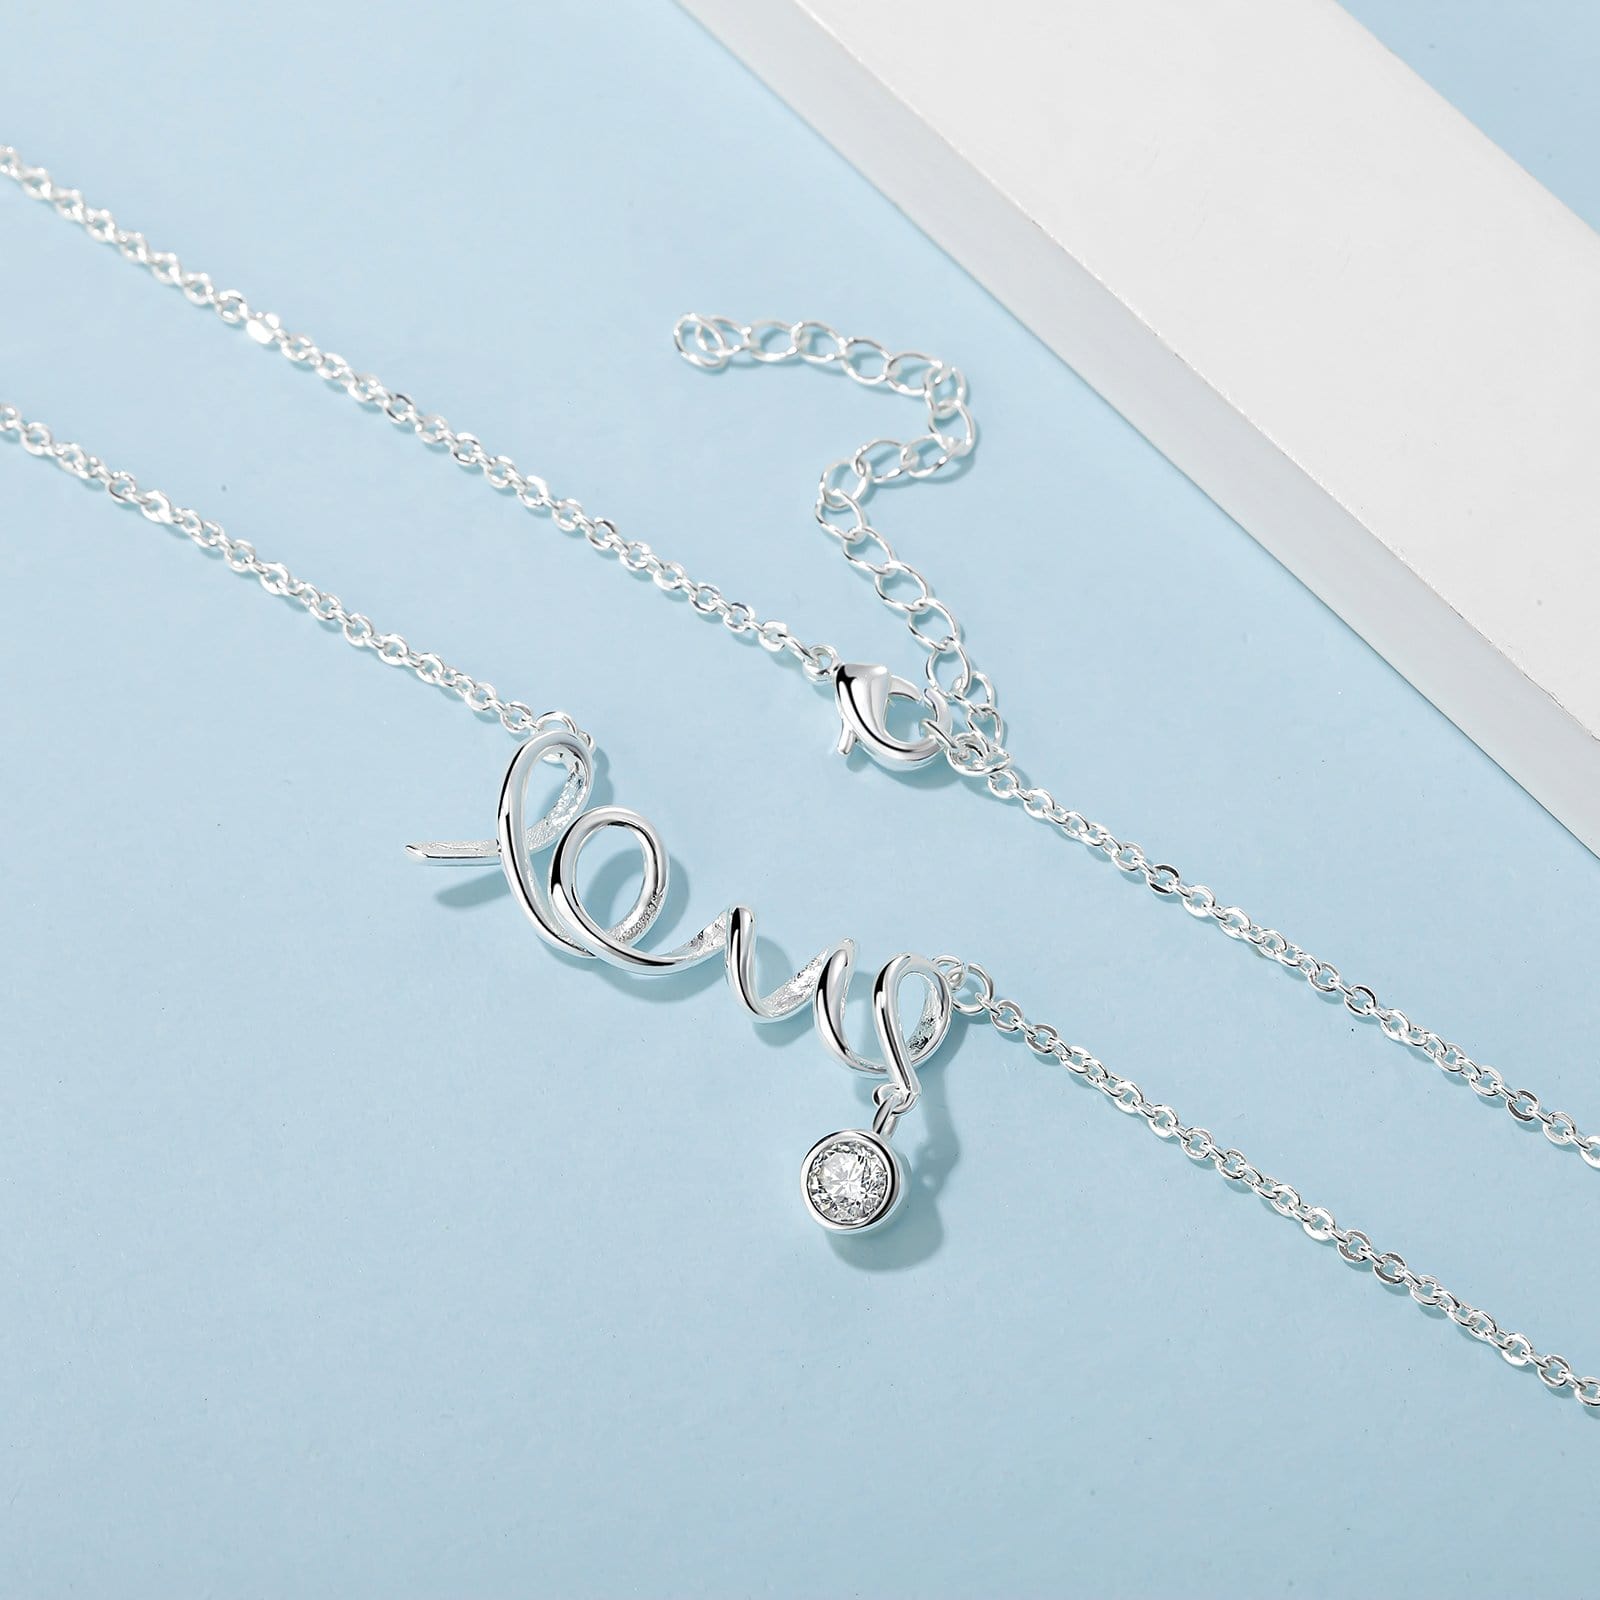 Necklaces Grandpa To Granddaughter - I Love You Forever Love Pendant Necklace GiveMe-Gifts